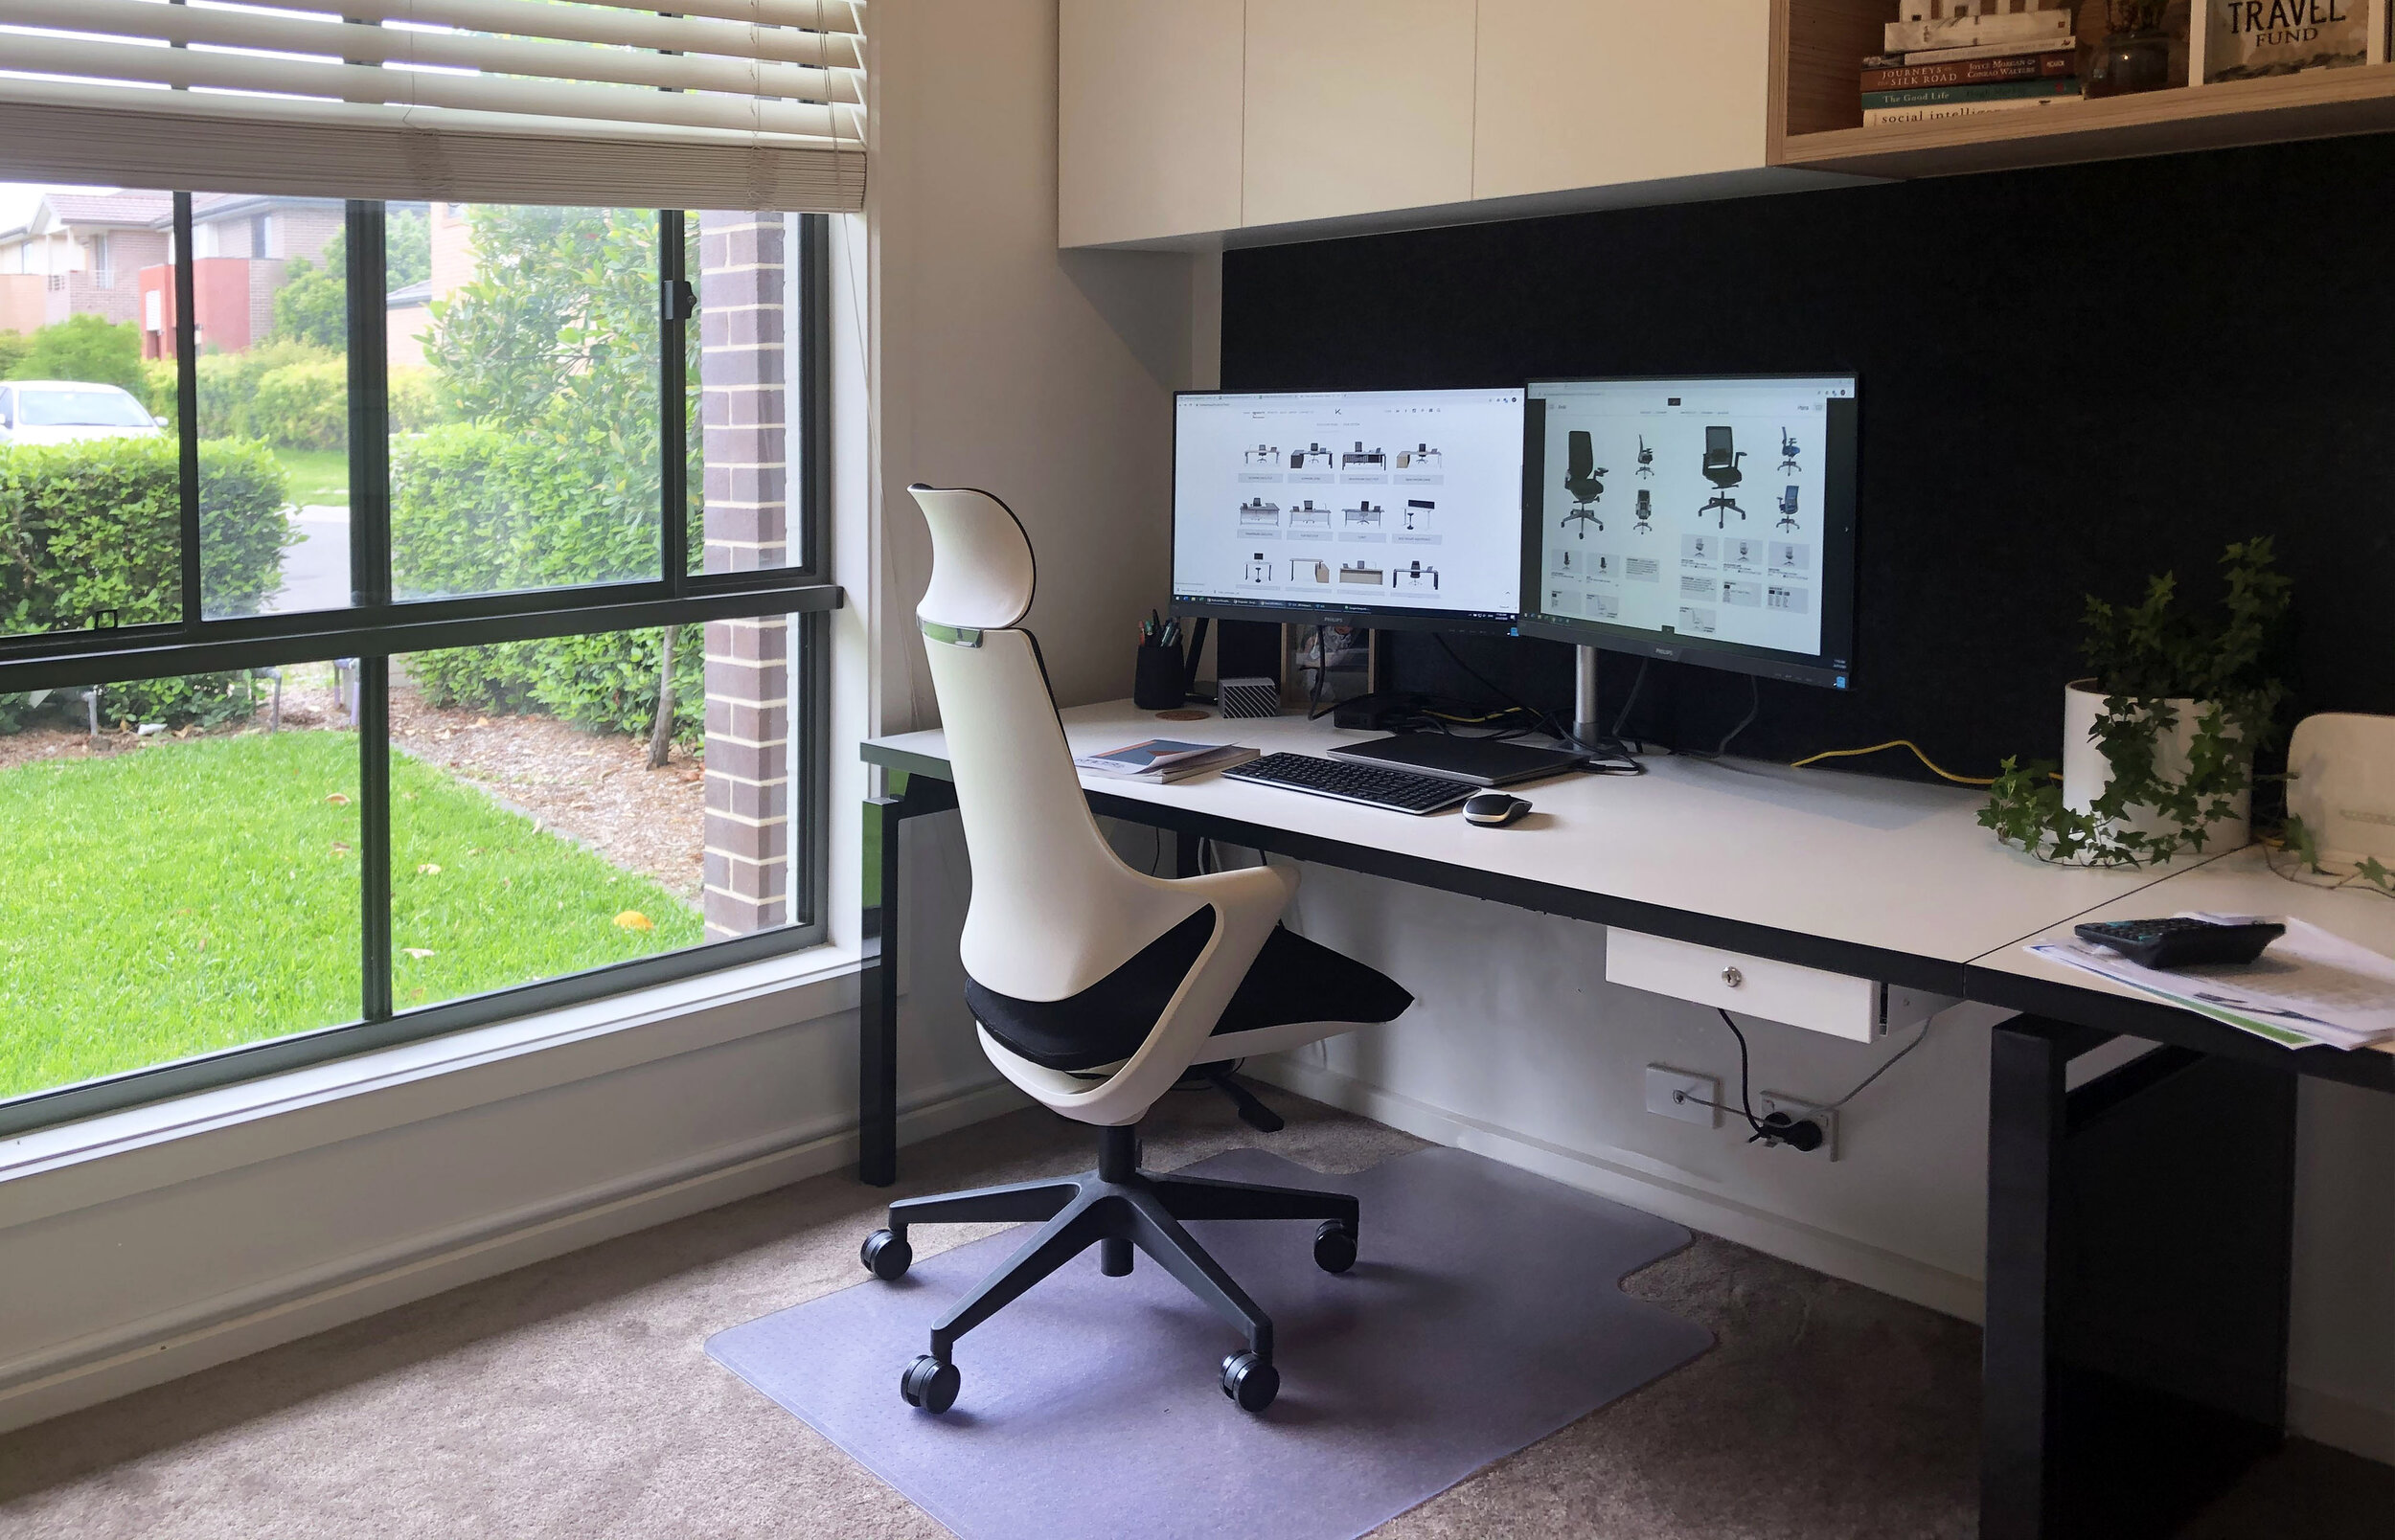 Choose The Best Types Of Study Chairs